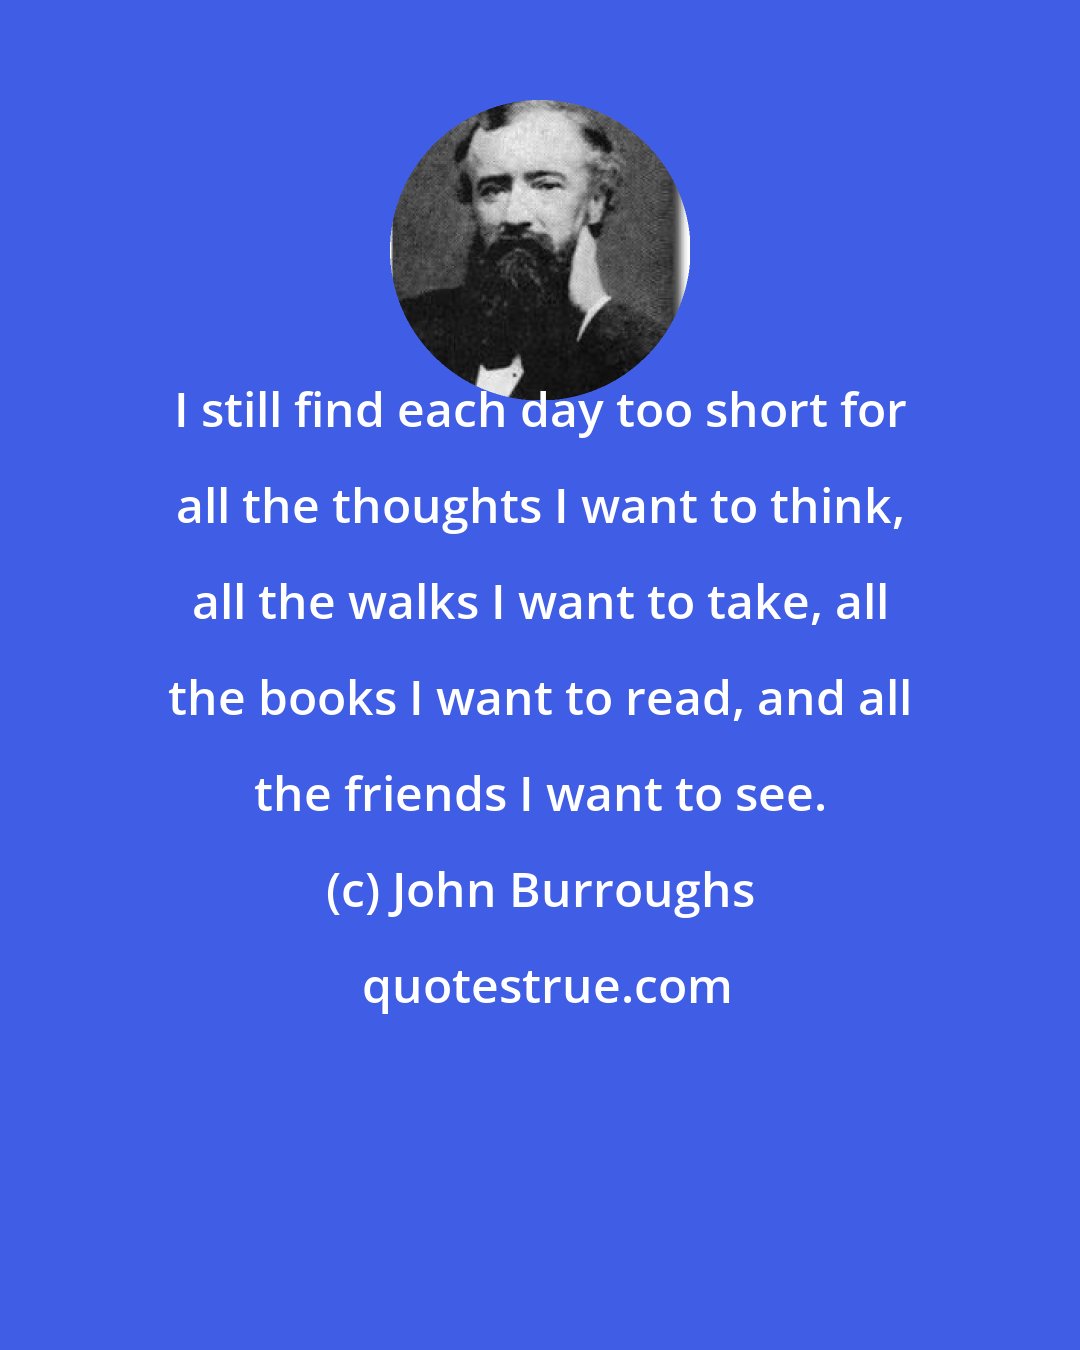 John Burroughs: I still find each day too short for all the thoughts I want to think, all the walks I want to take, all the books I want to read, and all the friends I want to see.